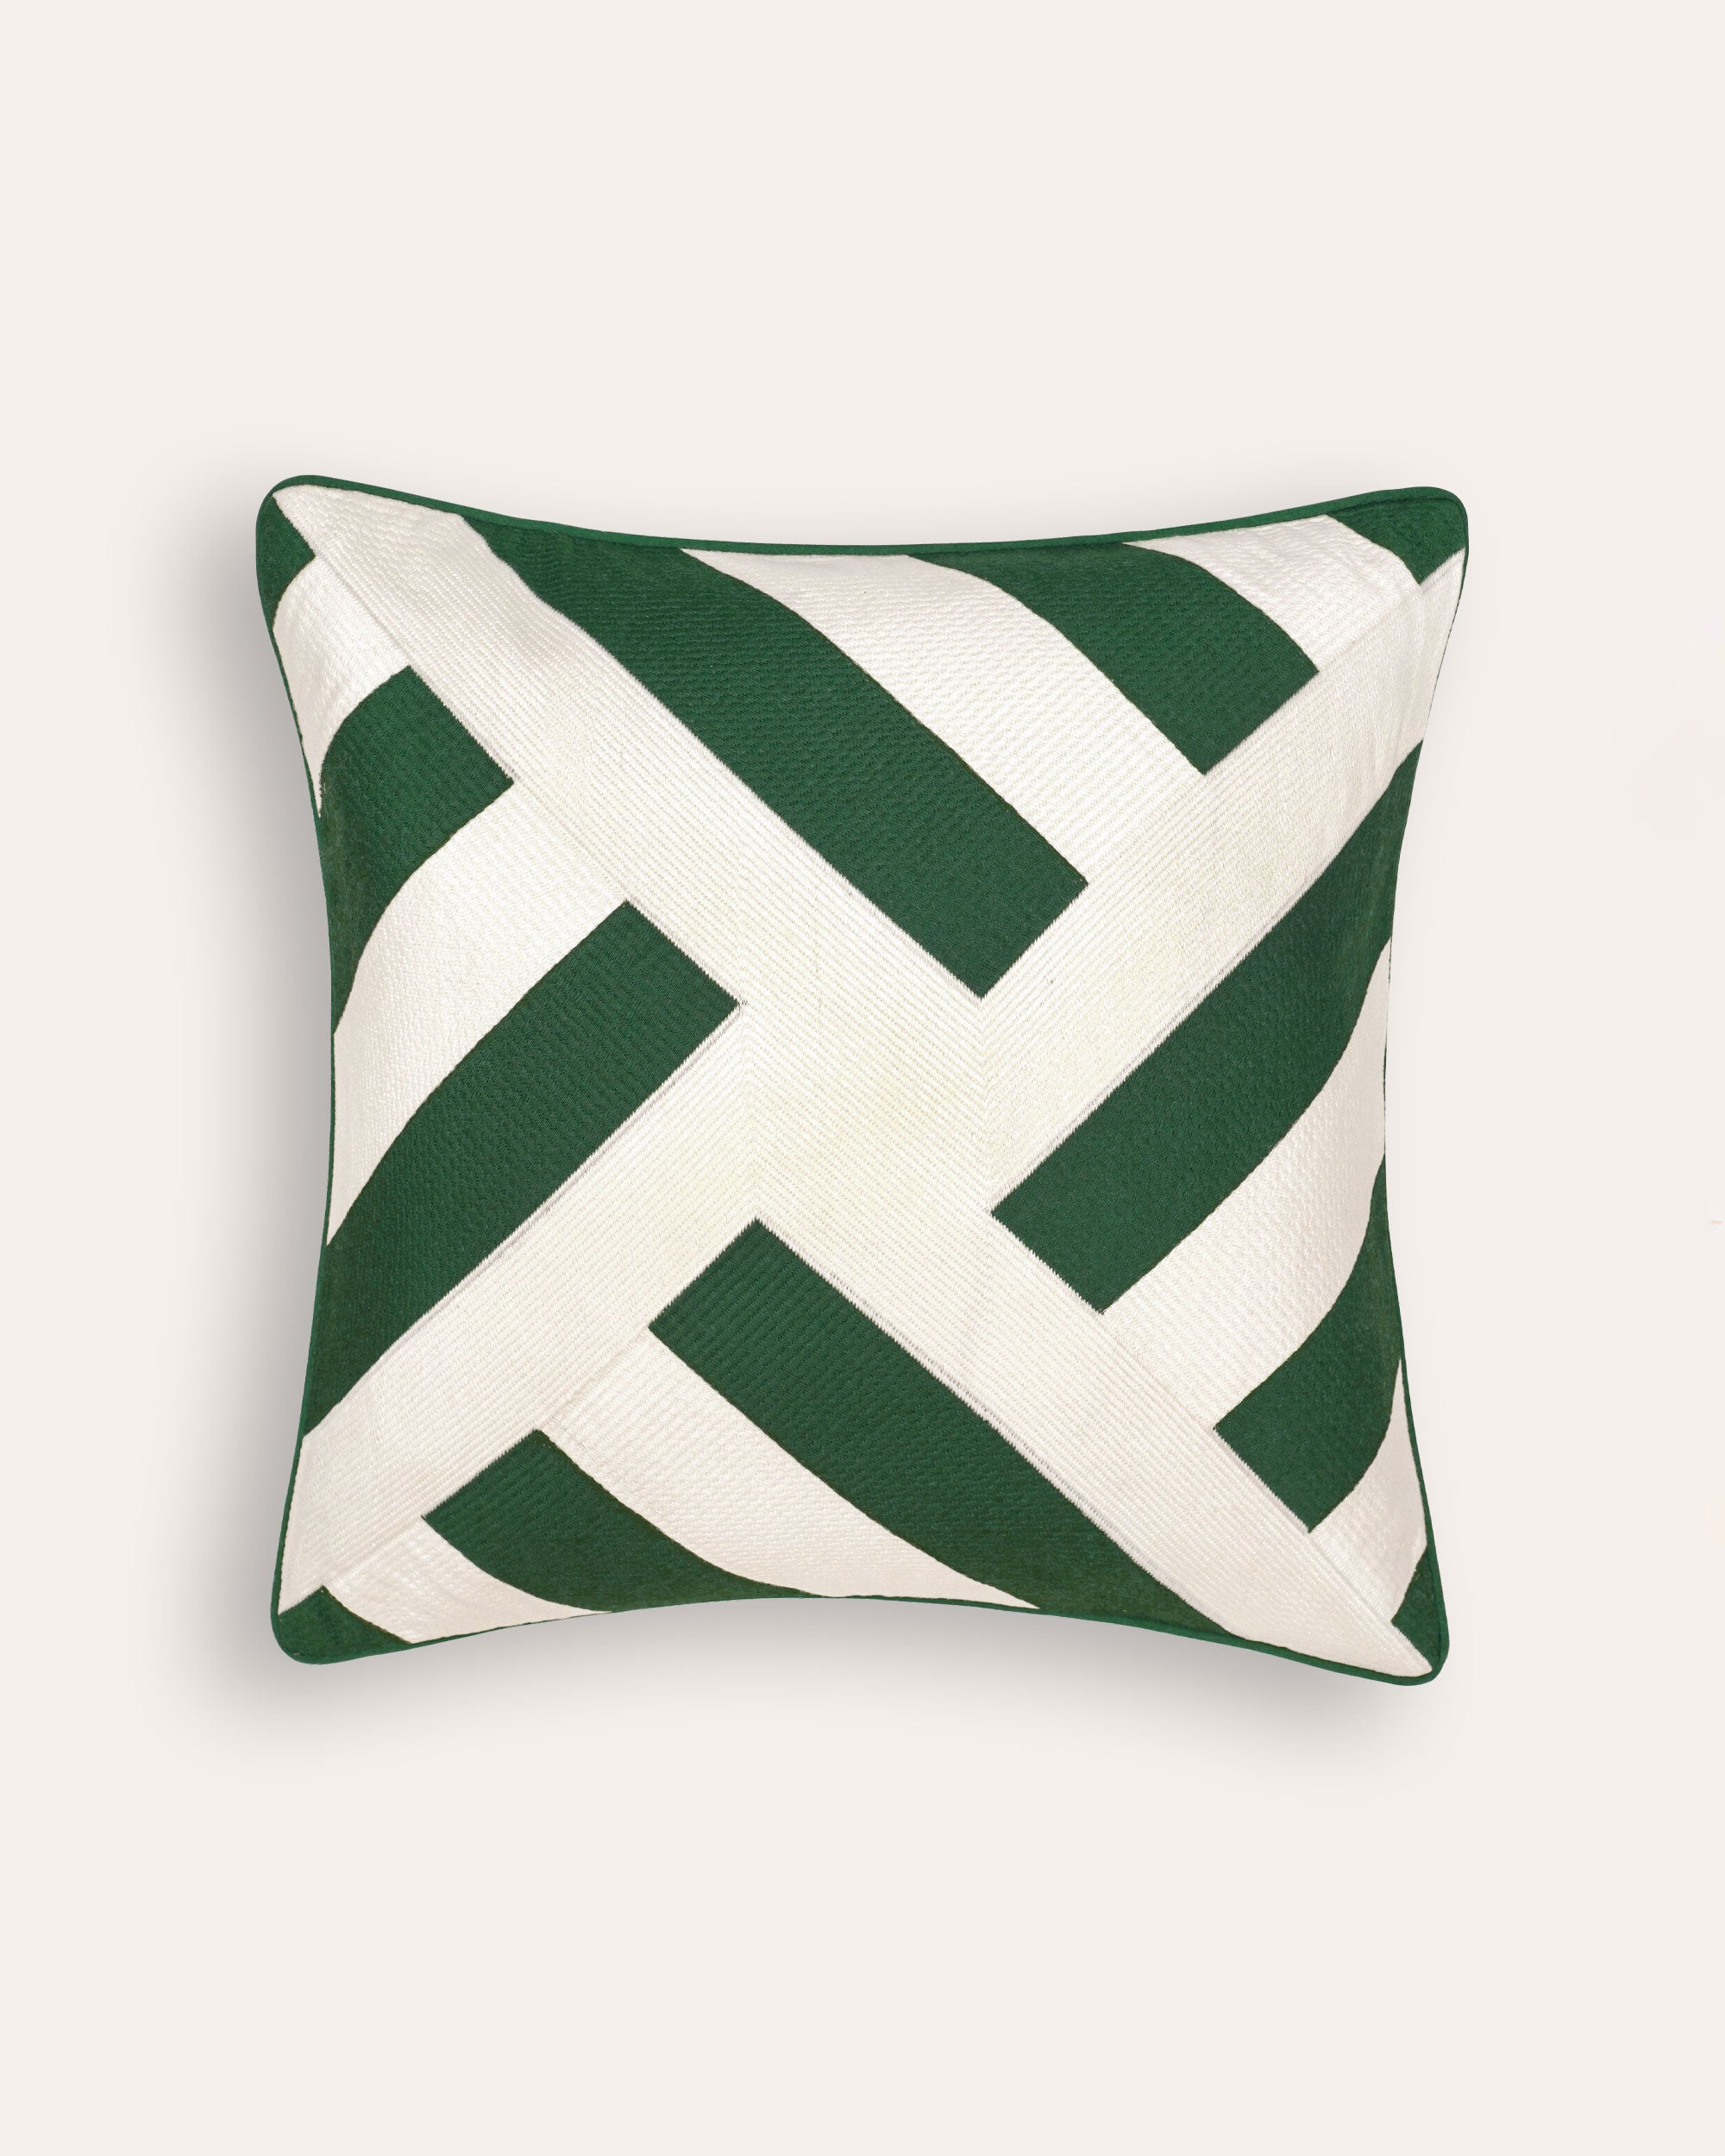 The Embroidered Envelope Cushion - The Green